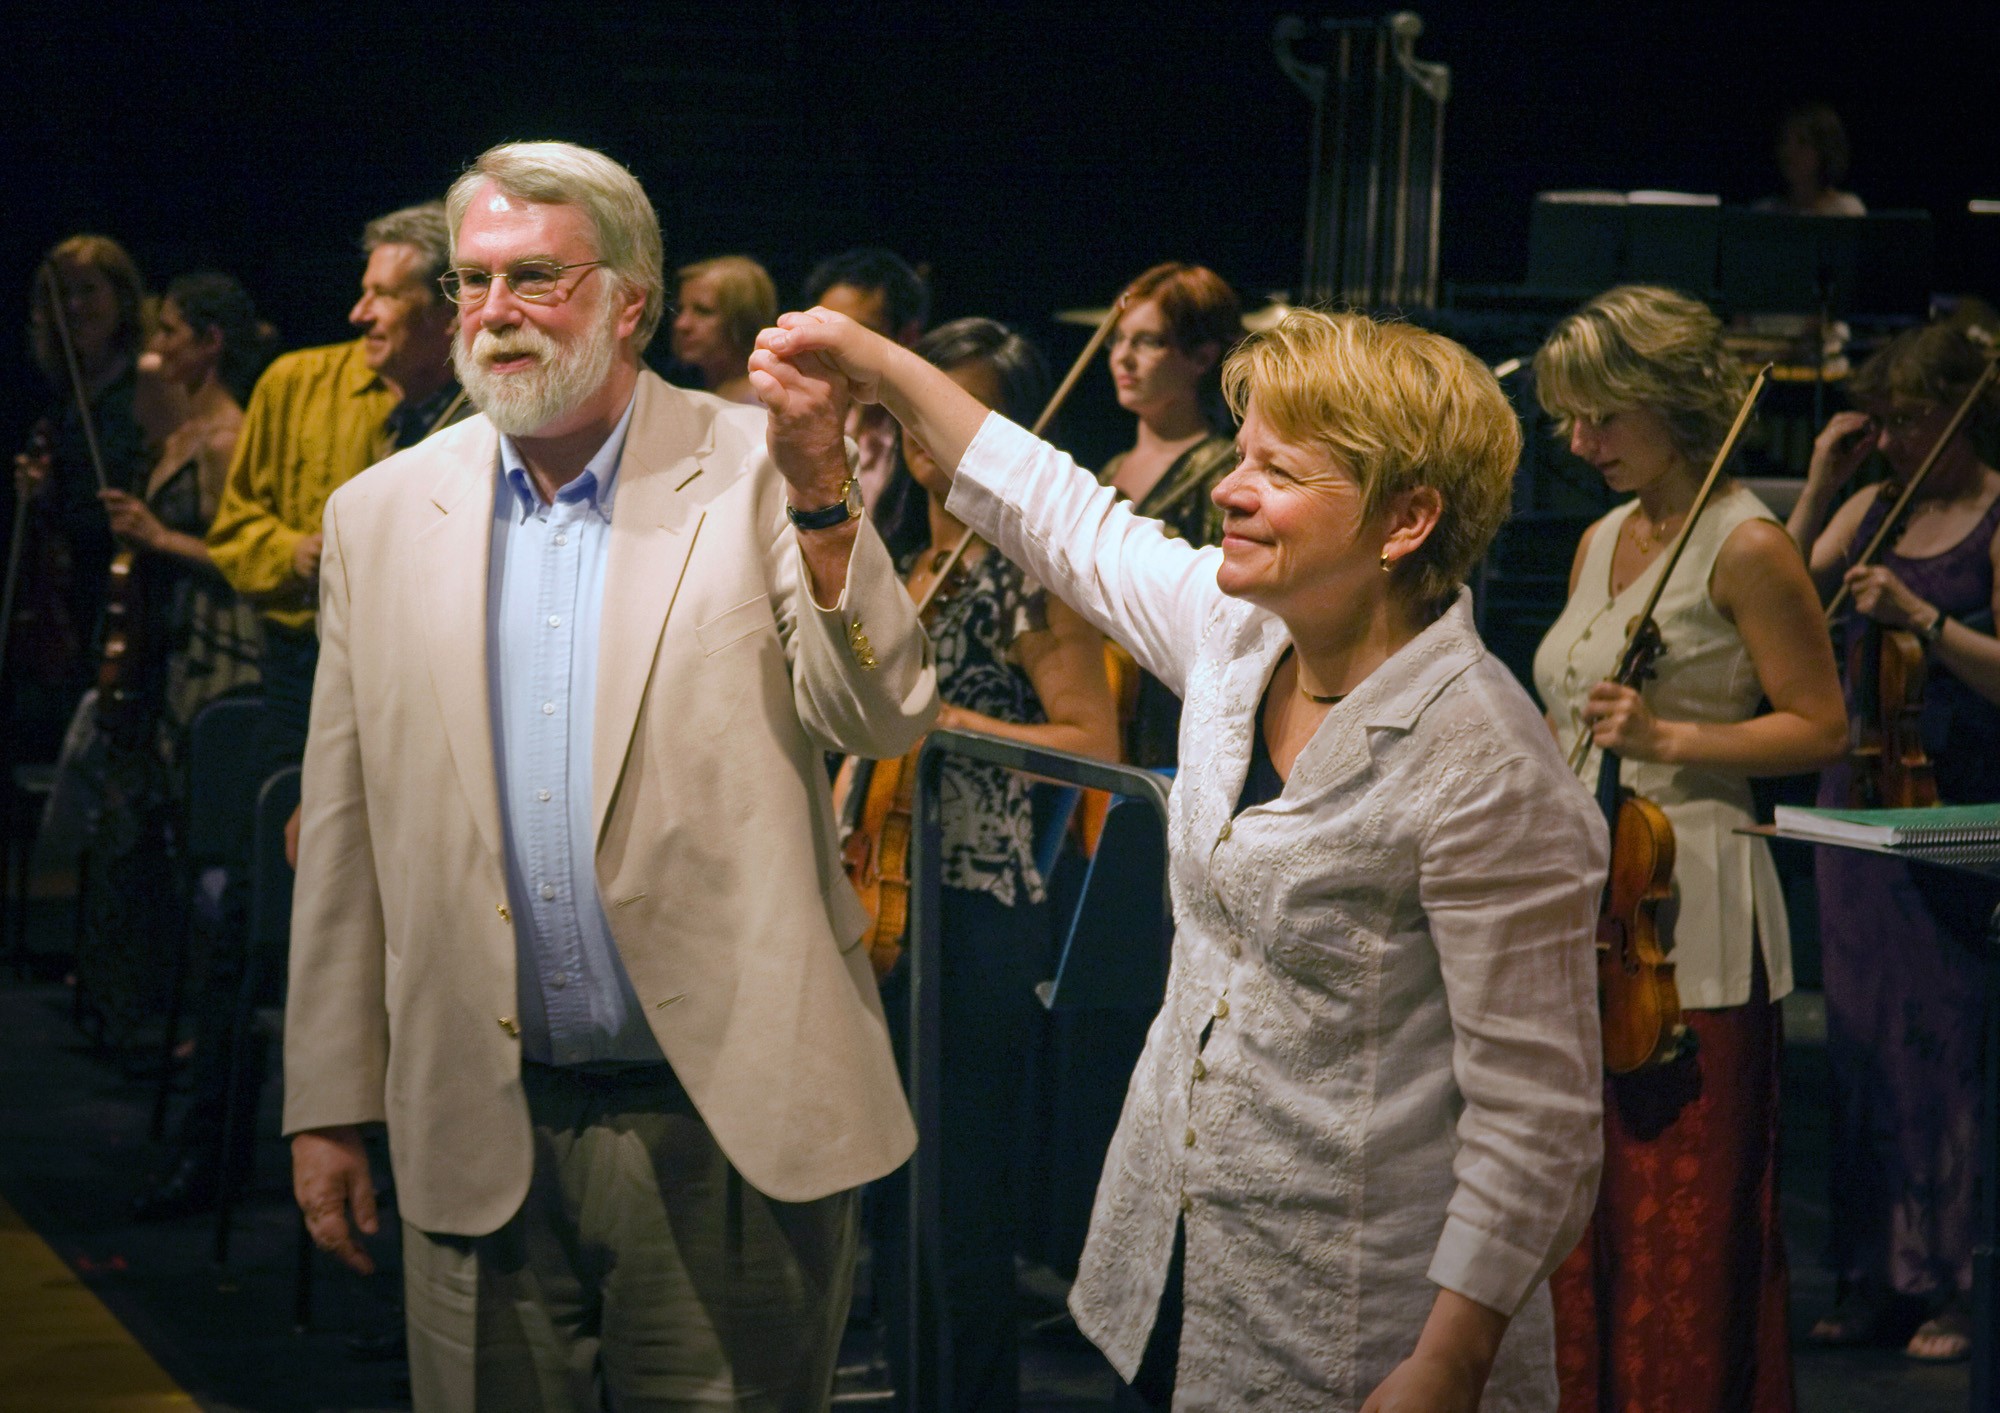 Christopher Rouse and Marin Alsop holding hands on stage in front of members of an orchestra.